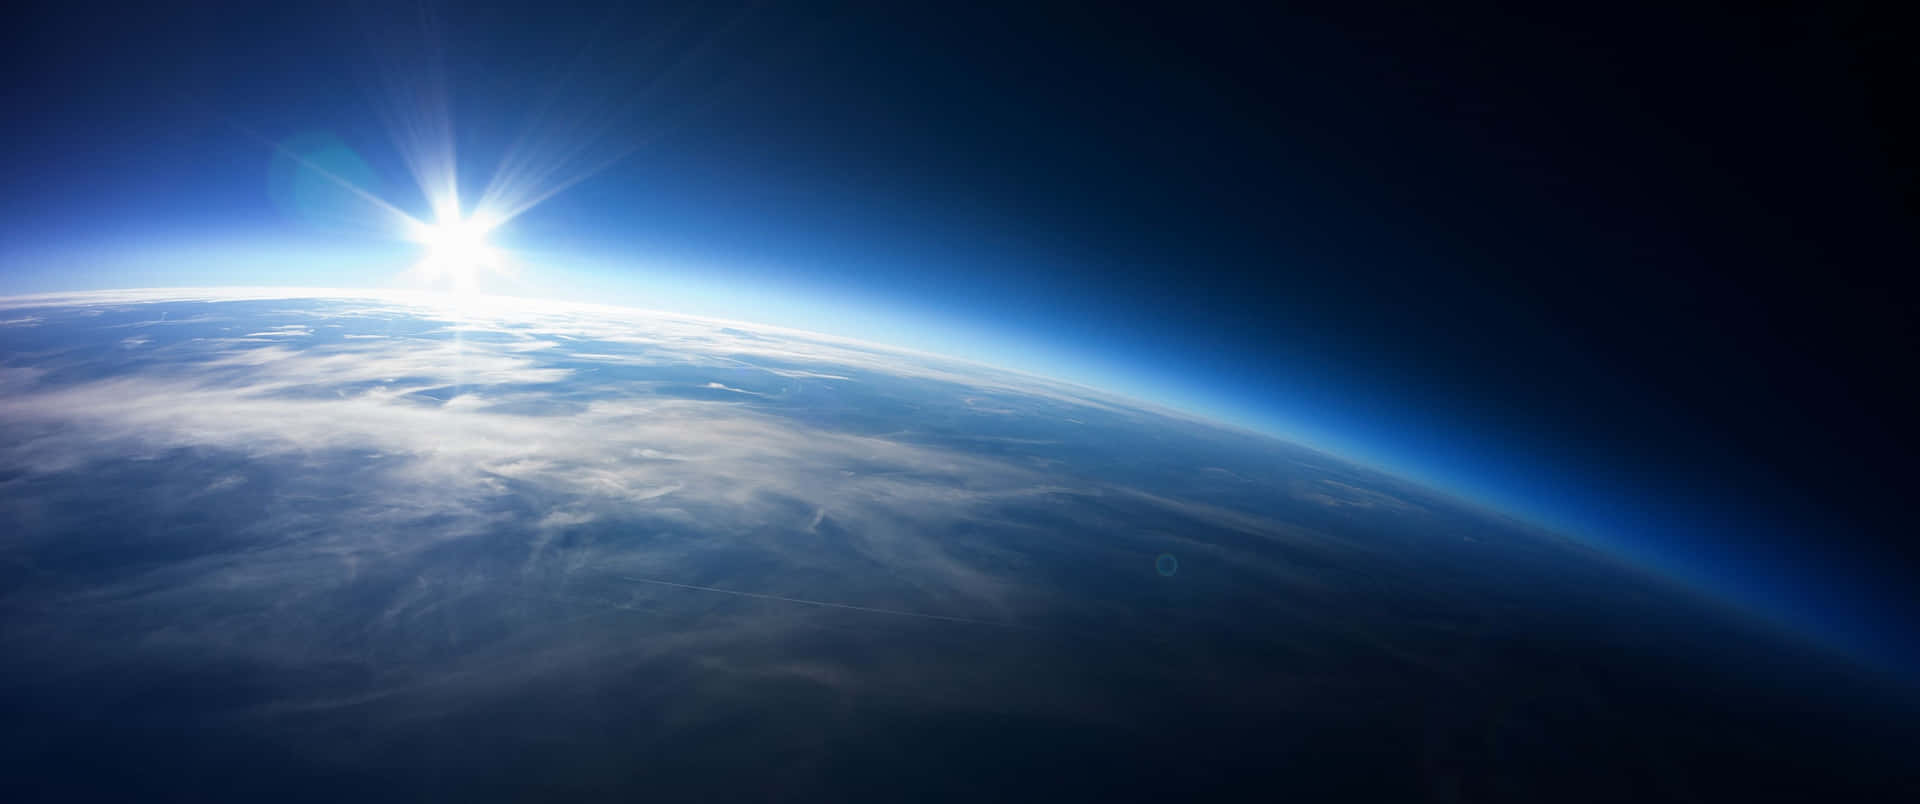 3440x1440p Social Background Earth Side